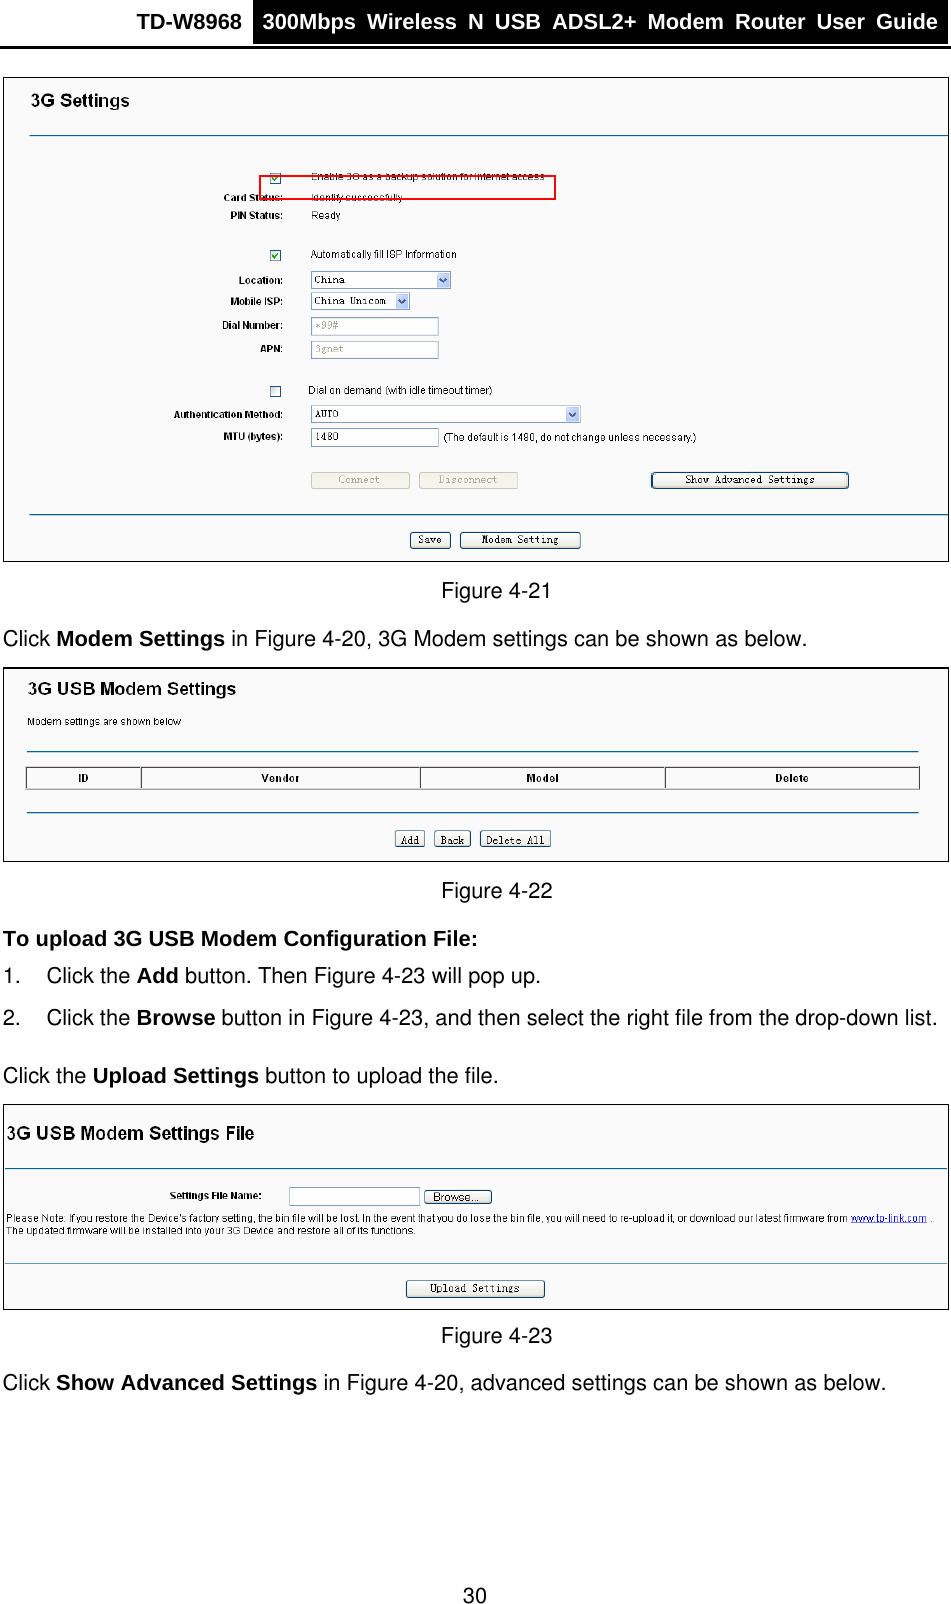 TD-W8968  300Mbps Wireless N USB ADSL2+ Modem Router User Guide   Figure 4-21 Click Modem Settings in Figure 4-20, 3G Modem settings can be shown as below.  Figure 4-22 To upload 3G USB Modem Configuration File:  1. Click the Add button. Then Figure 4-23 will pop up. 2. Click the Browse button in Figure 4-23, and then select the right file from the drop-down list. Click the Upload Settings button to upload the file.  Figure 4-23 Click Show Advanced Settings in Figure 4-20, advanced settings can be shown as below. 30 